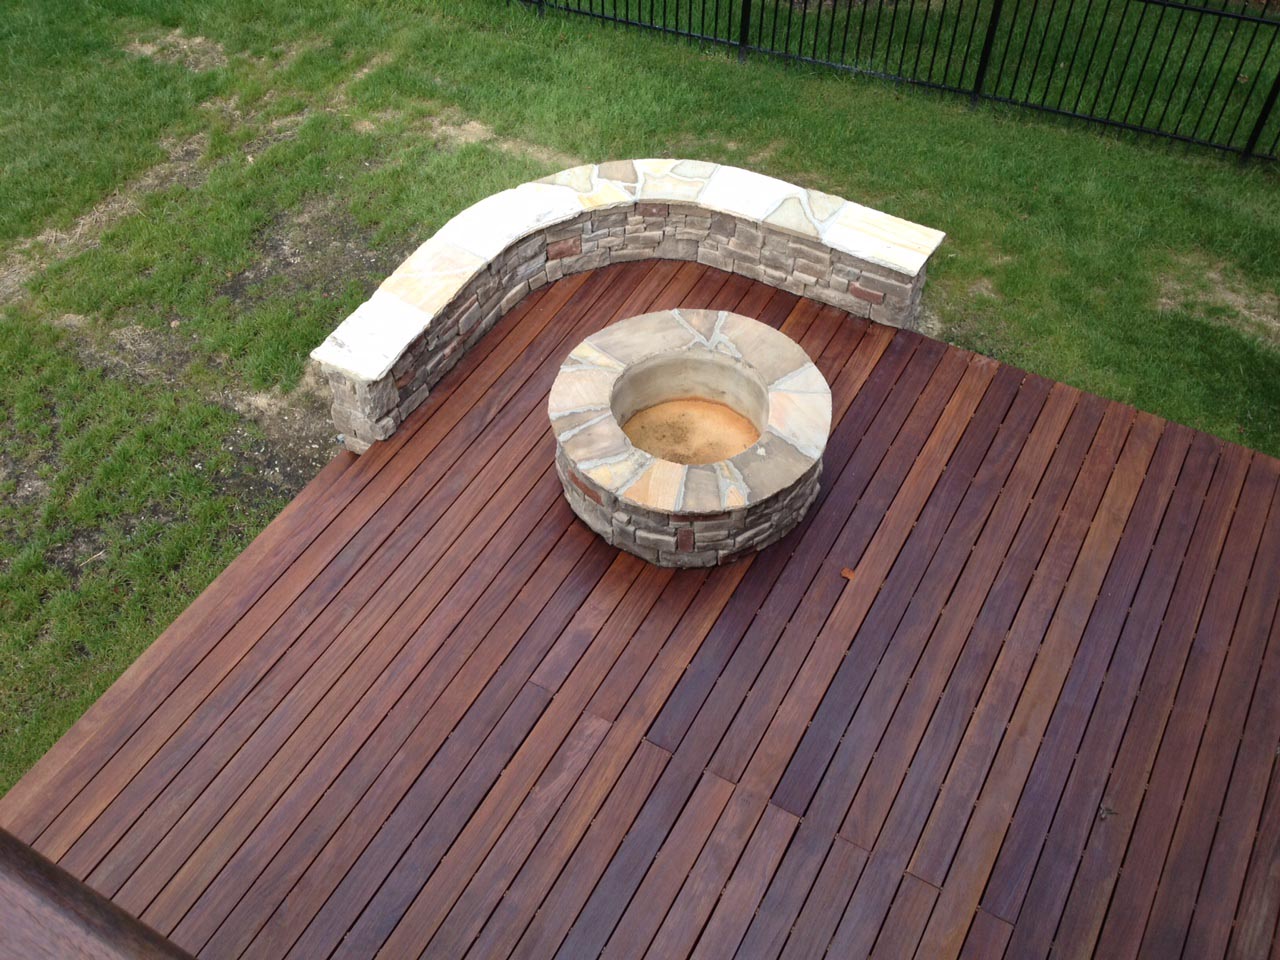 Fire pit with wooden deck